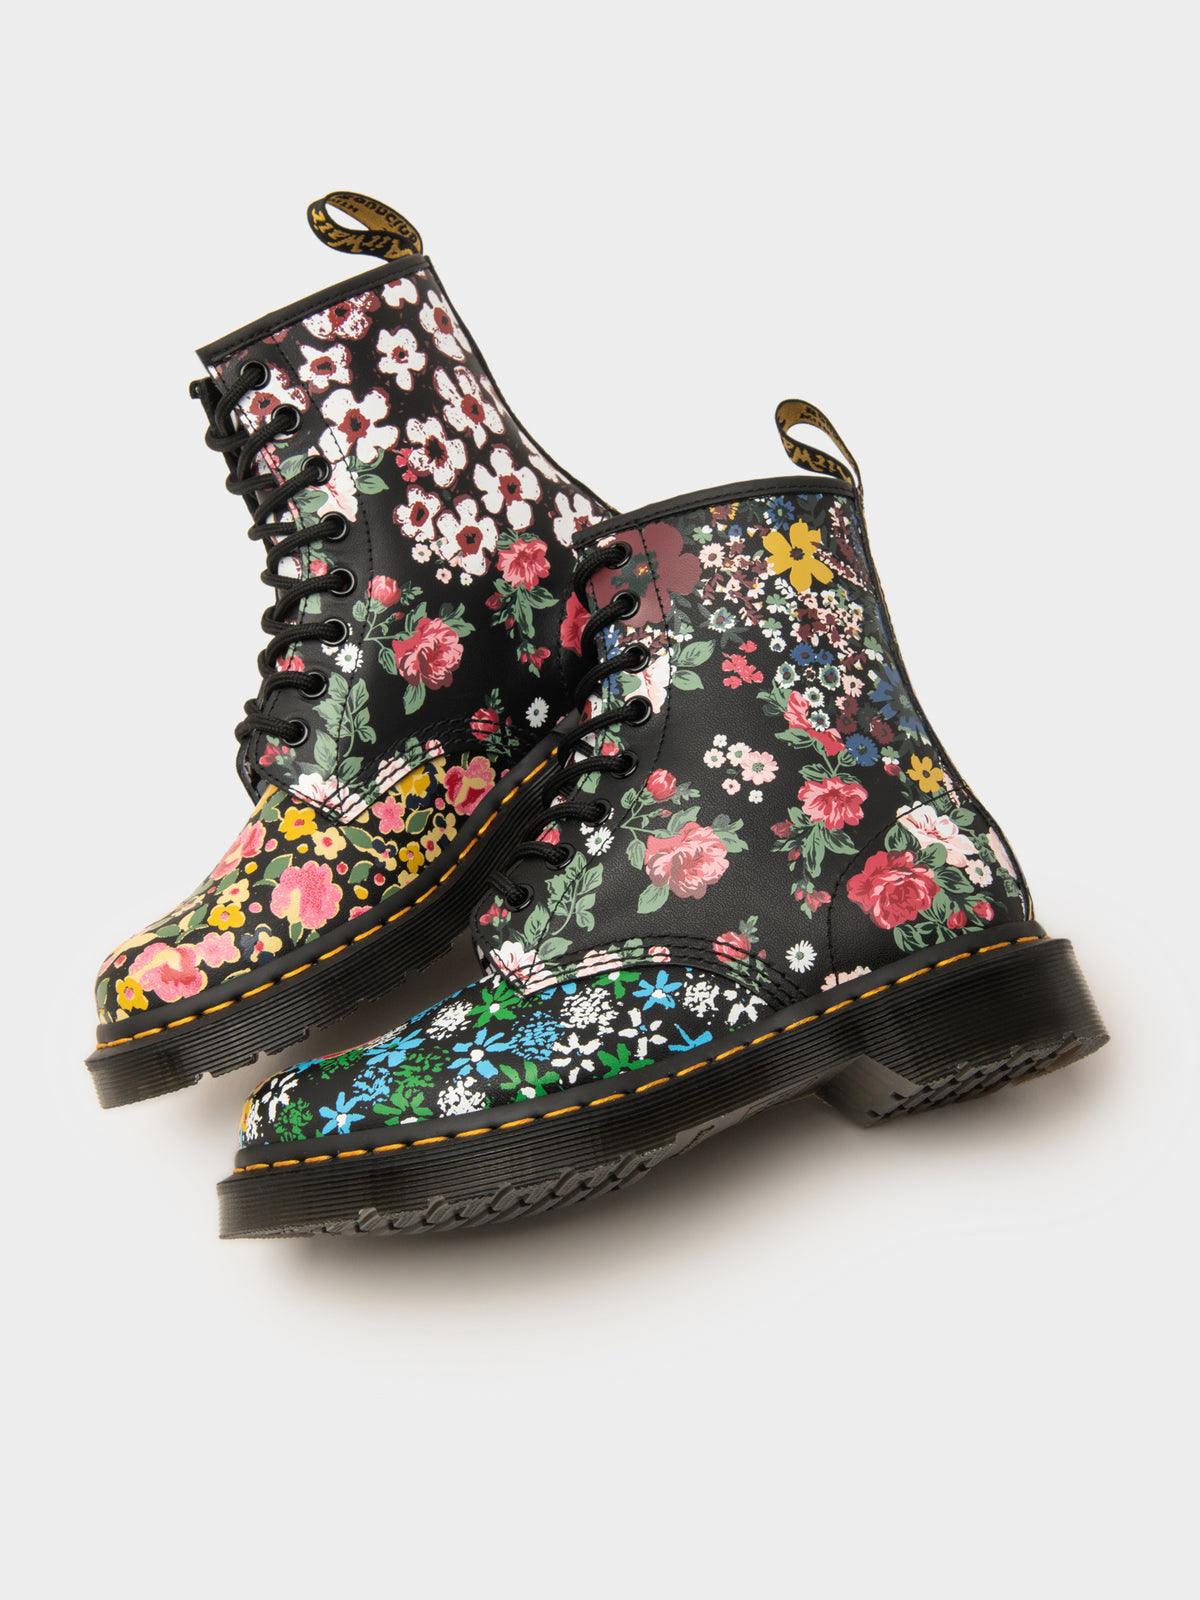 Womens 1460 Pascal 8 Eyelet Boot in Floral Mashup